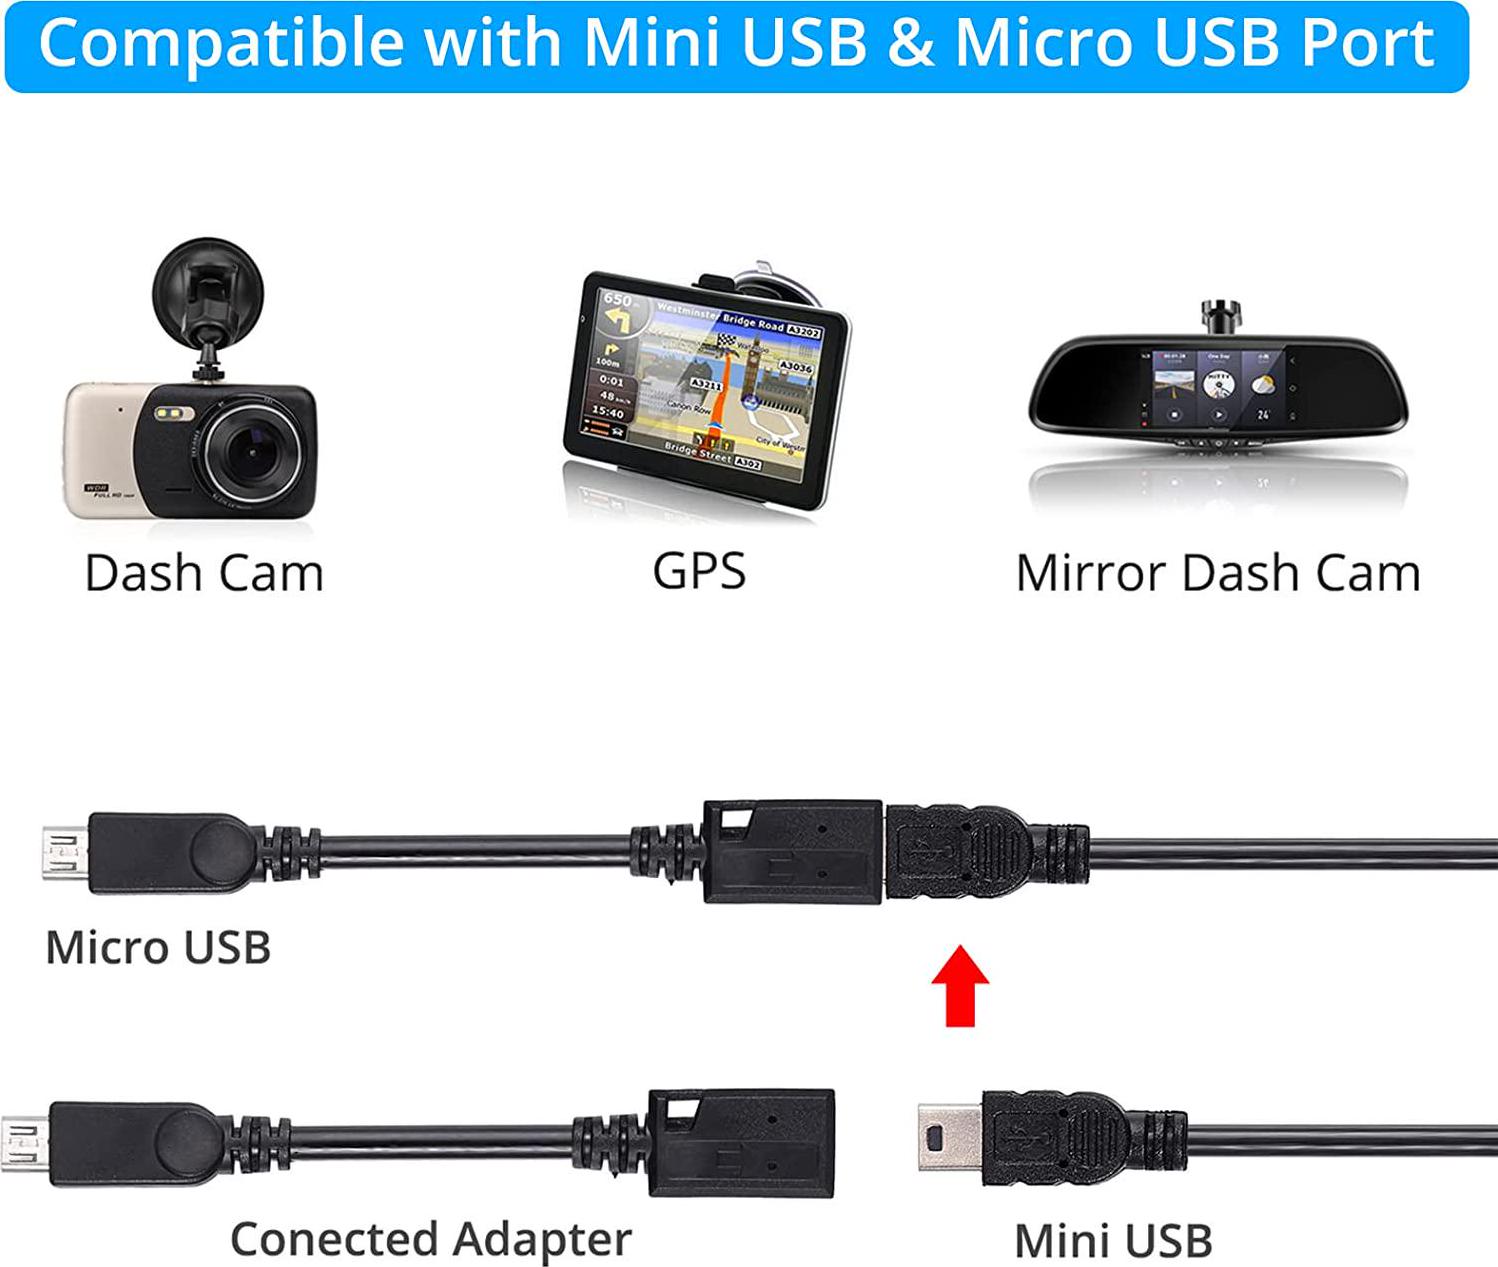 eSynic, eSynic Dash Cam Hardwire Kit Universal Dash Cam Hard Wire Kit with Low-Profile Mini/Mini/ATO/Micro2 Fuse Kit and a Micro USB to Mini USB Adapter Cable for Dash Cam GPS Navigator Car Recorder etc